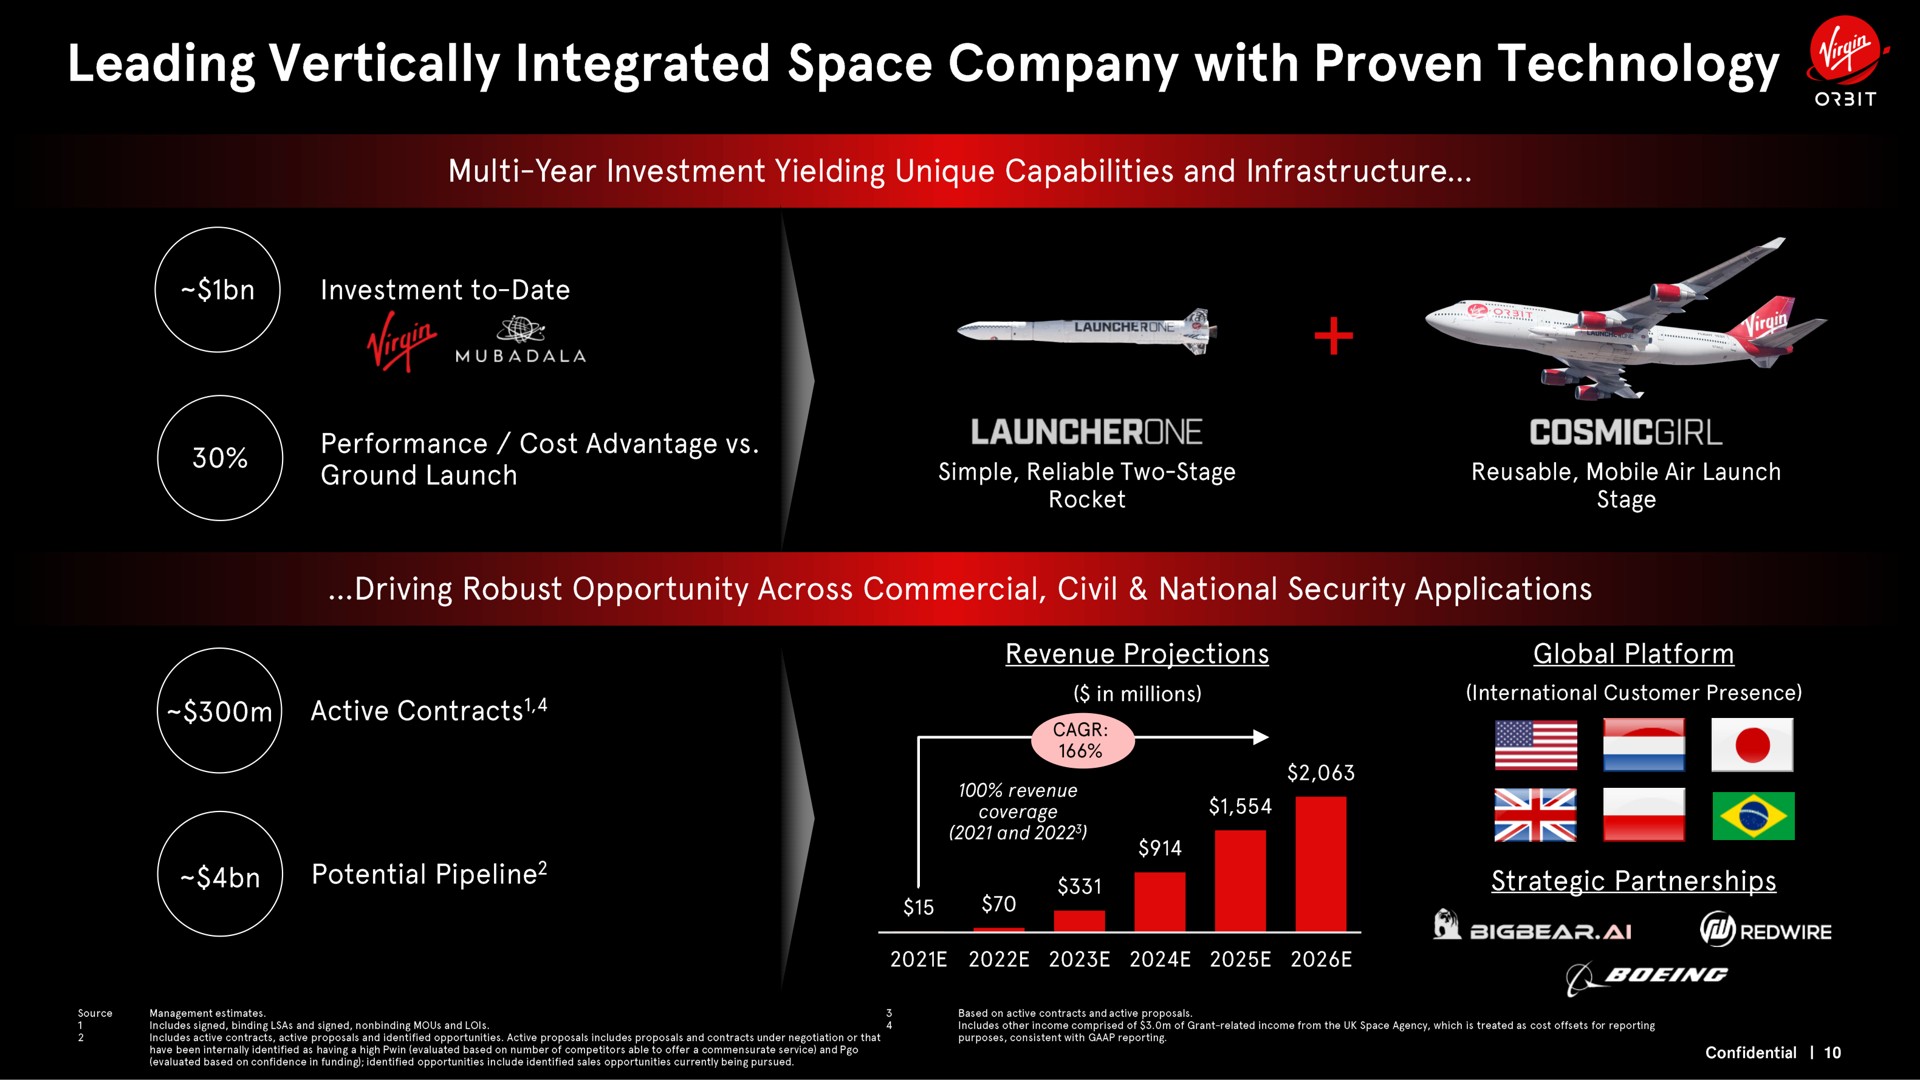 leading vertically integrated space company with proven technology | Virgin Orbit